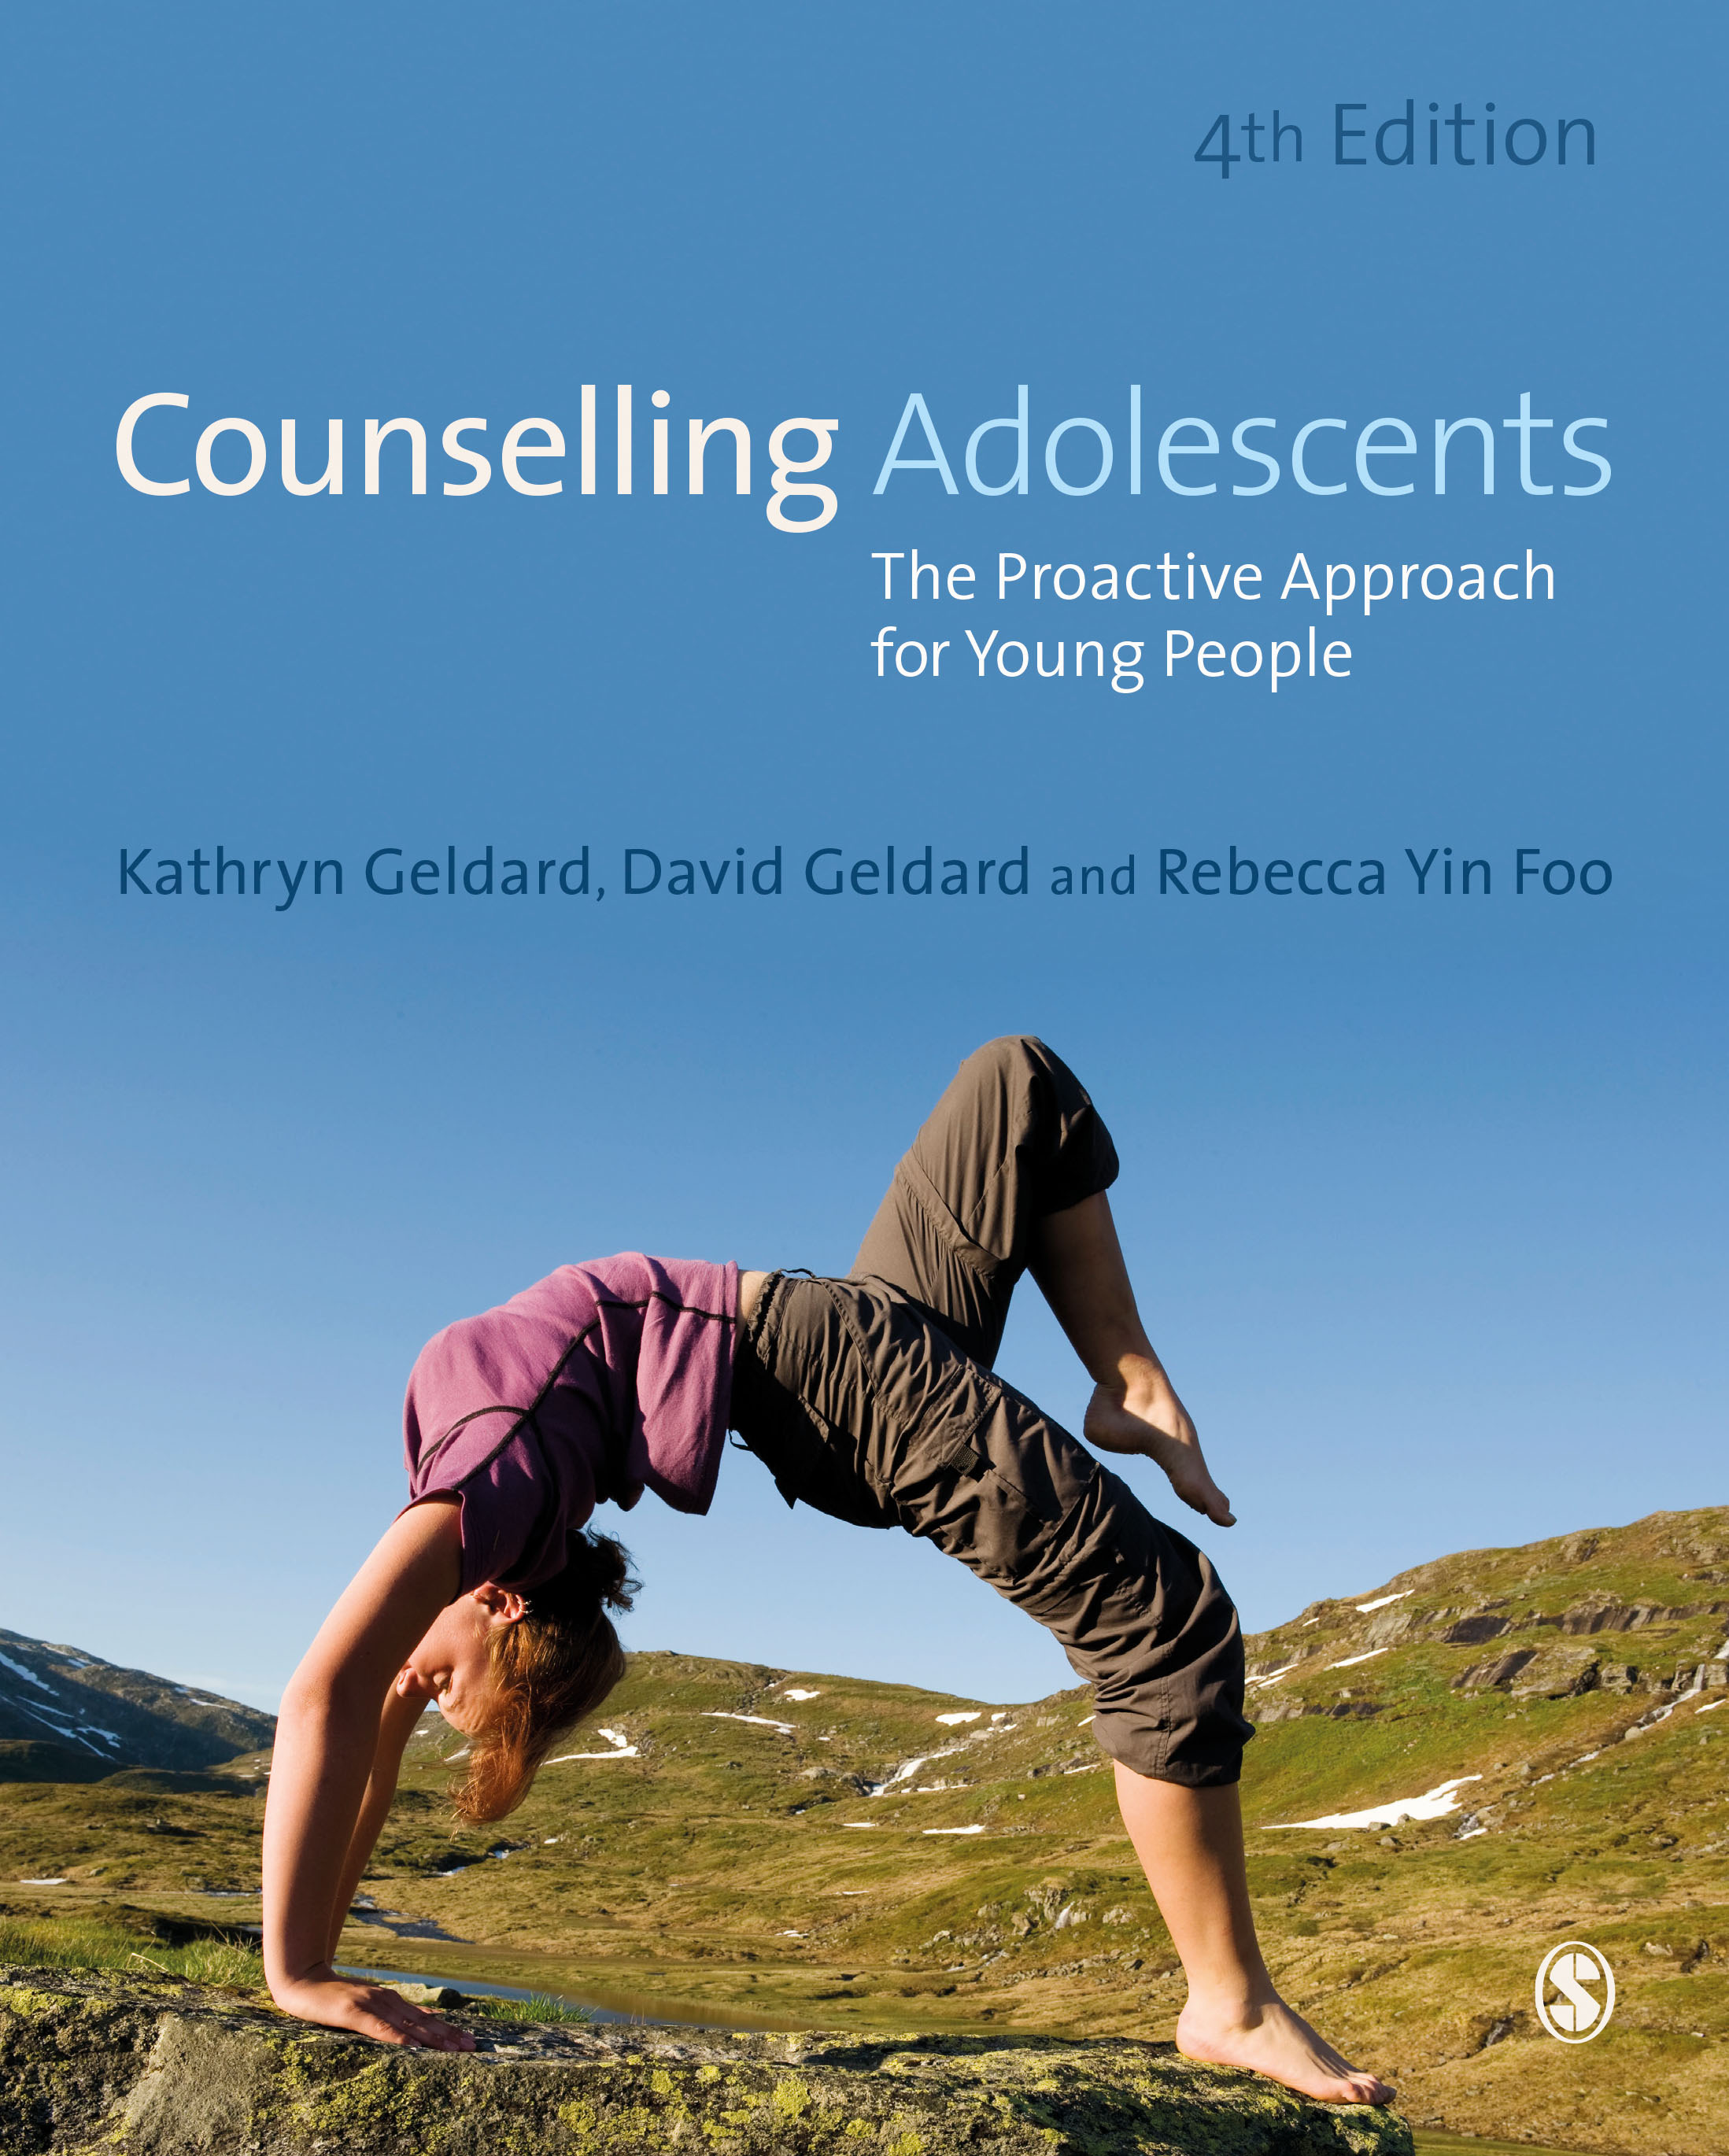 Counselling Adolescents: The Proactive Approach for Young People book cover image 